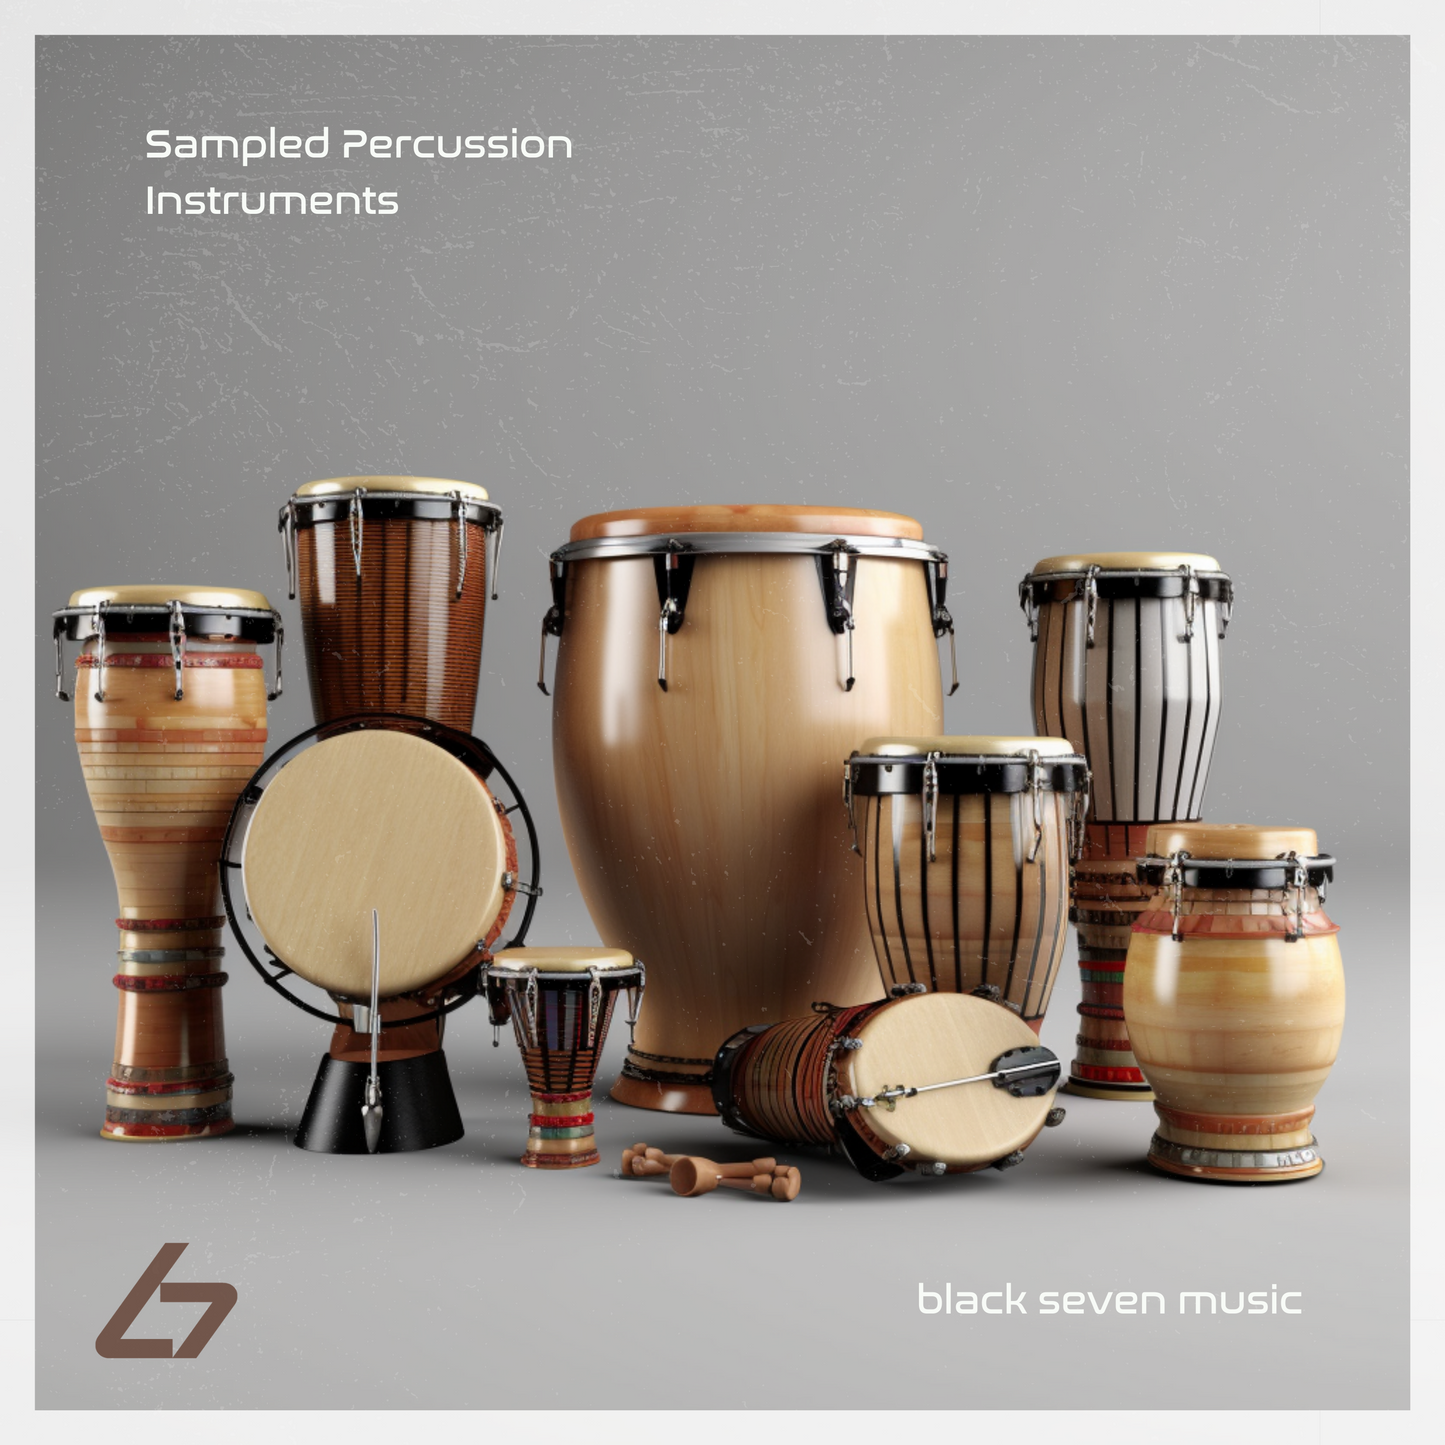 Sampled Percussion Instruments